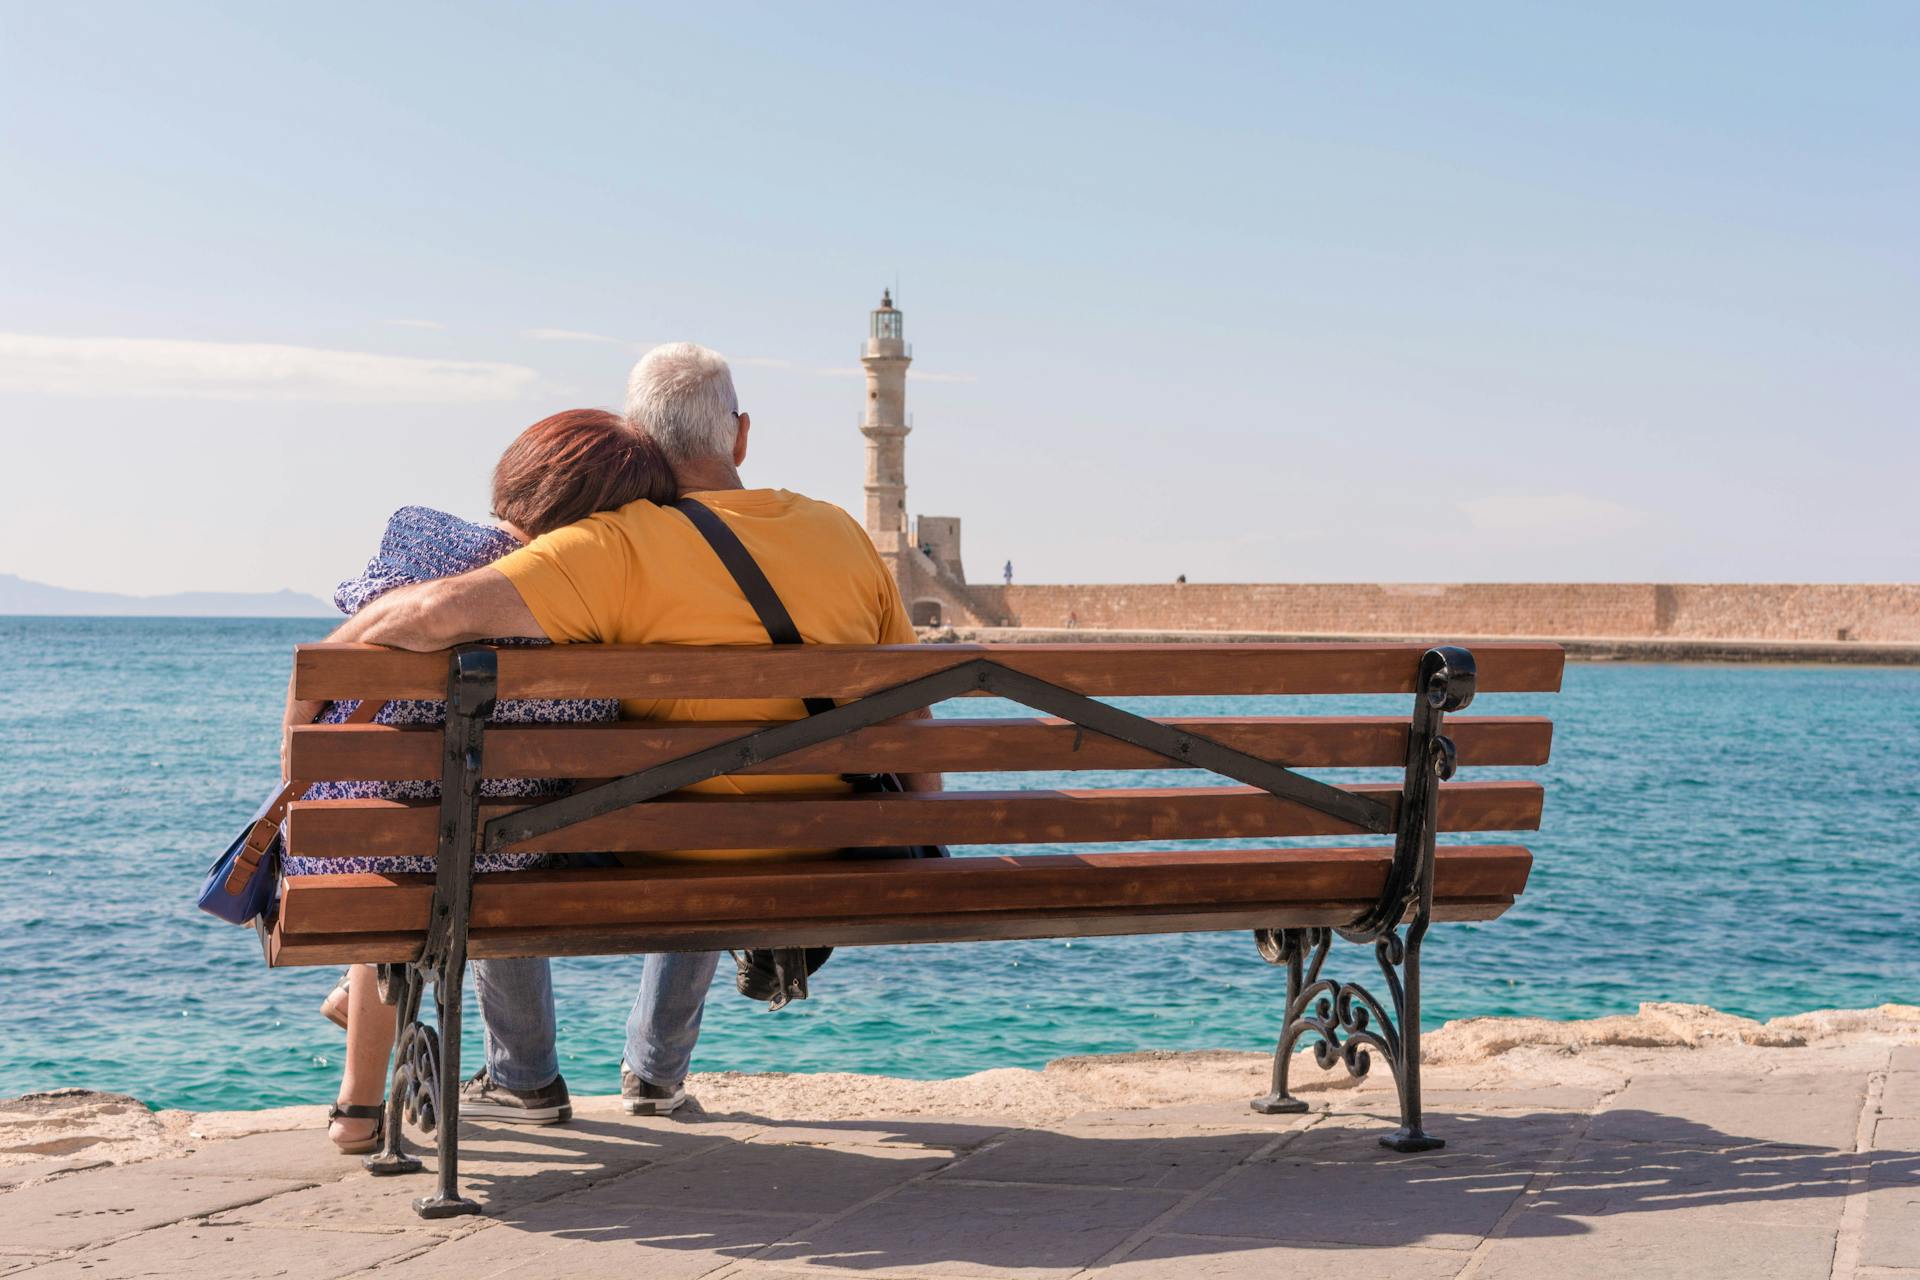 A mature couple sitting on the bench | Source: Pexels